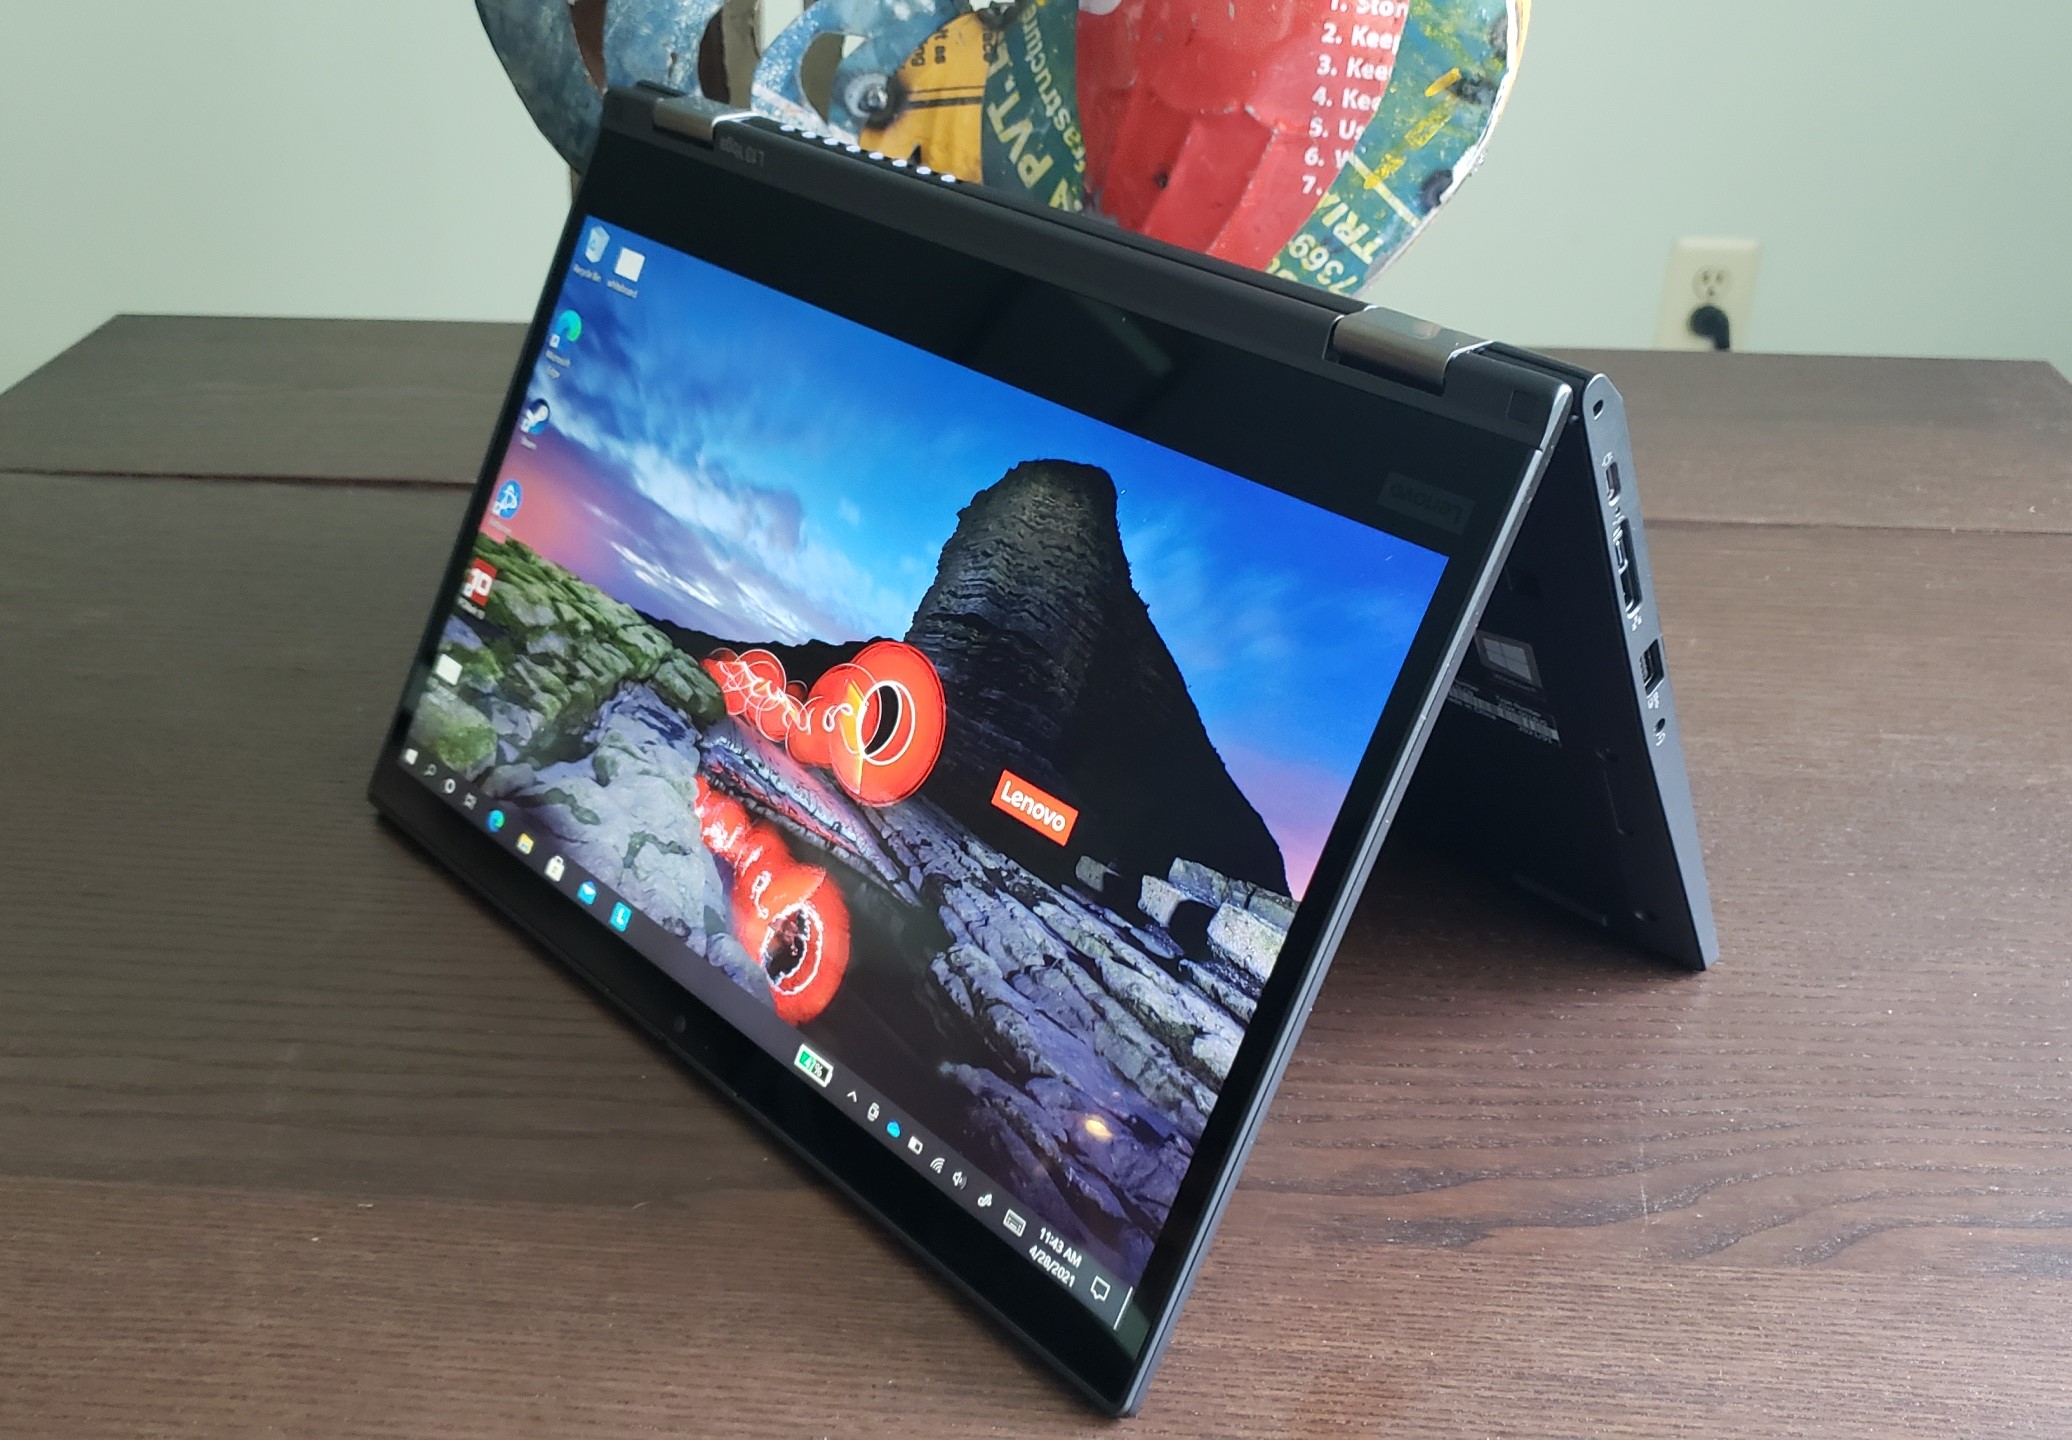 What's wrong Linguistics Jumping jack Hands-on Review: Lenovo ThinkPad L13 Yoga Gen 2 – Technical Fowl